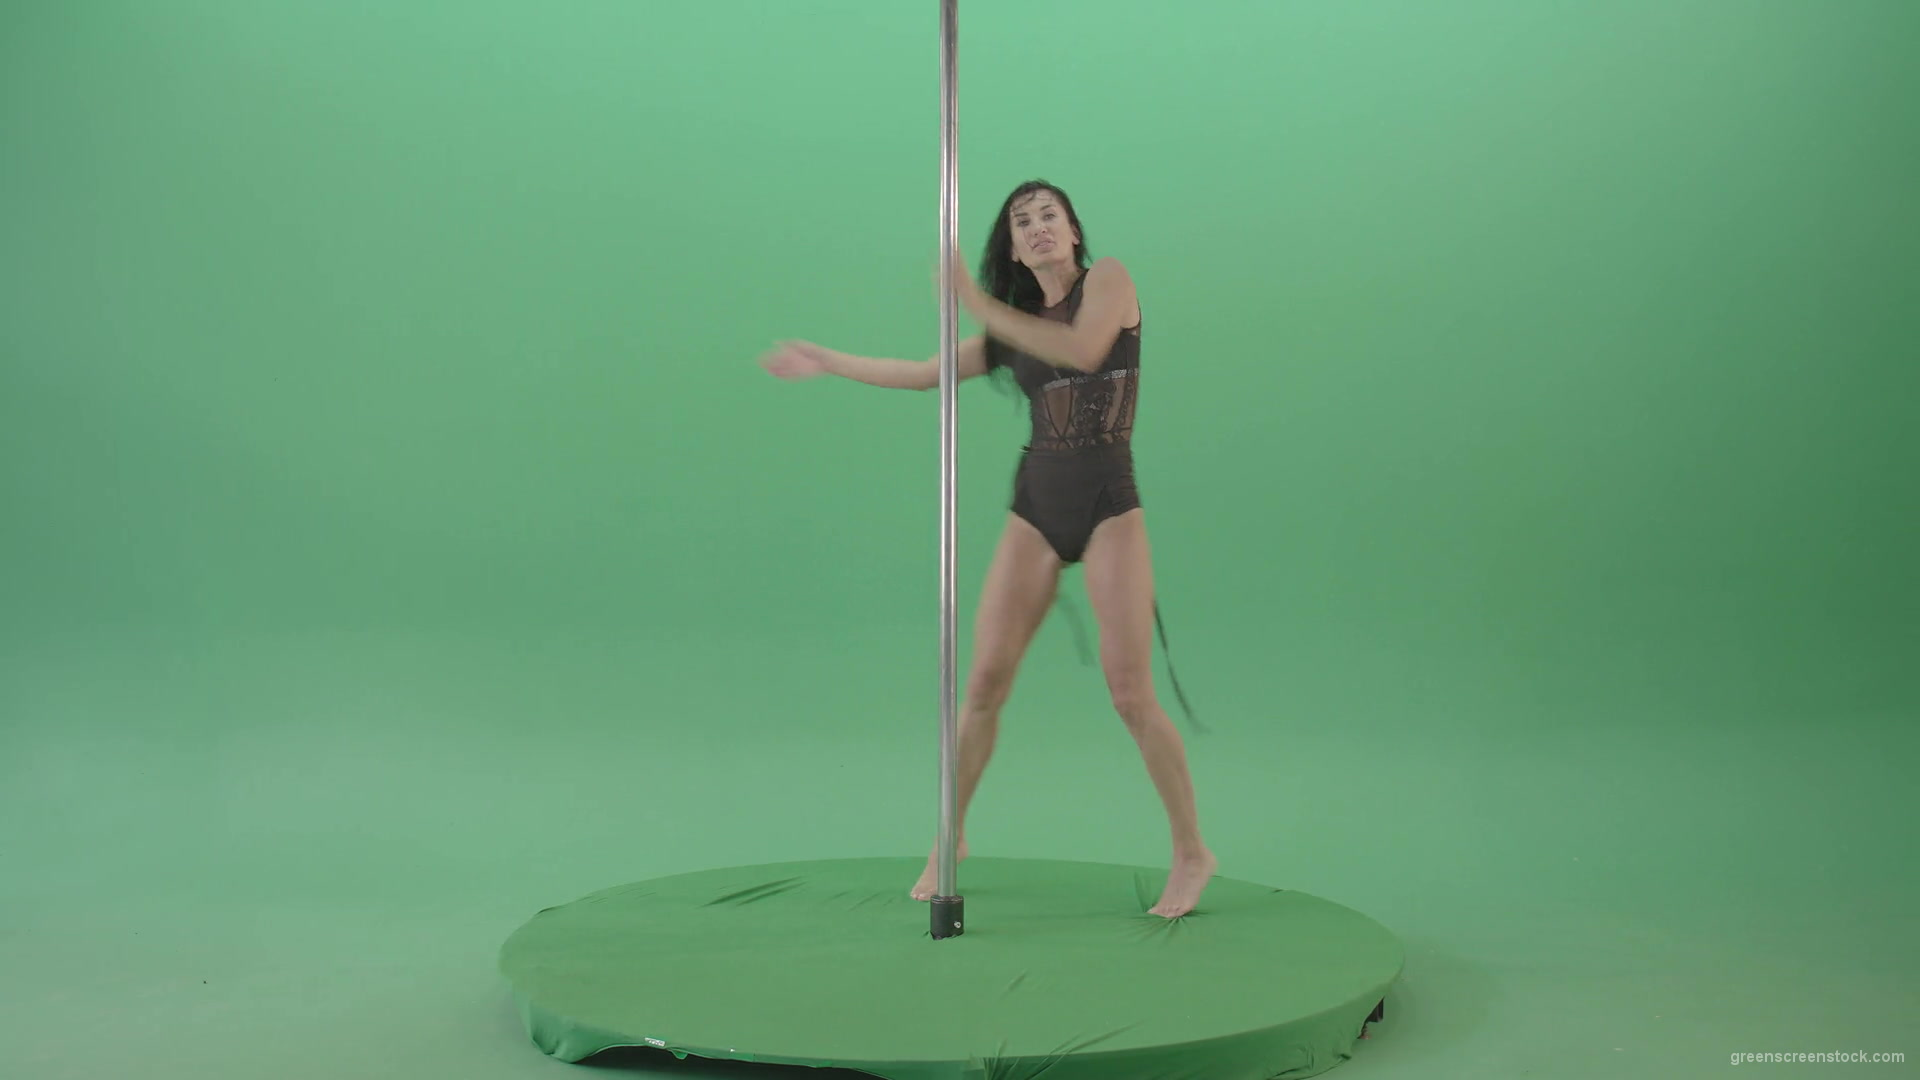 Sexy-girl-in-Lingerie-wear-dancing-strip-pole-dance-isolated-on-green-screen-4K-Video-Footage-1920_004 Green Screen Stock